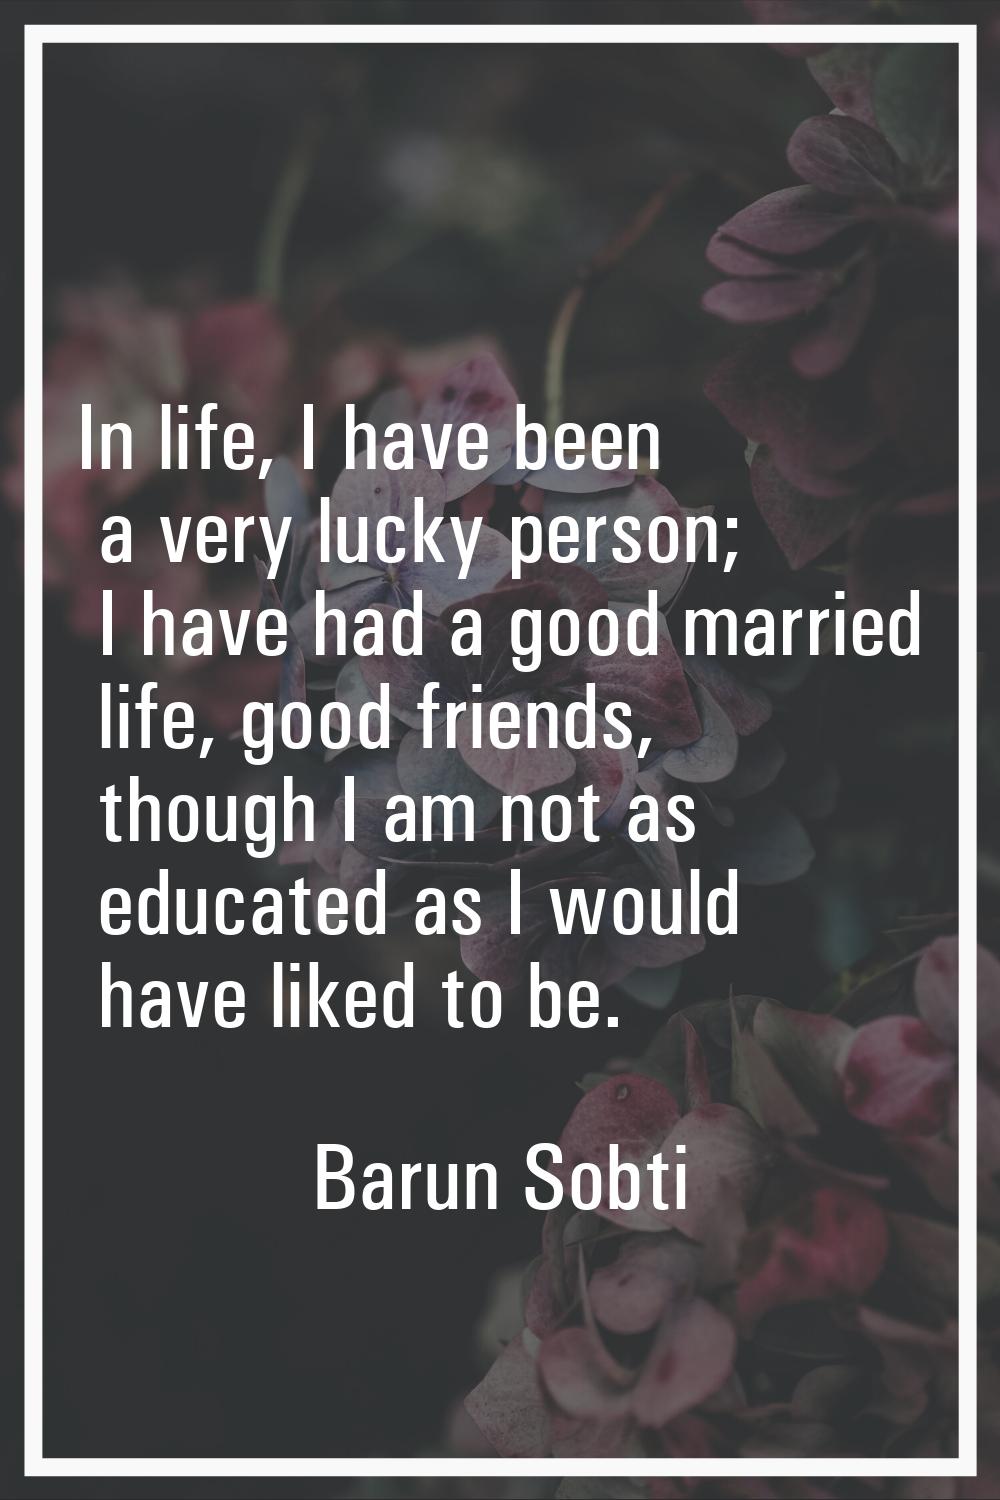 In life, I have been a very lucky person; I have had a good married life, good friends, though I am